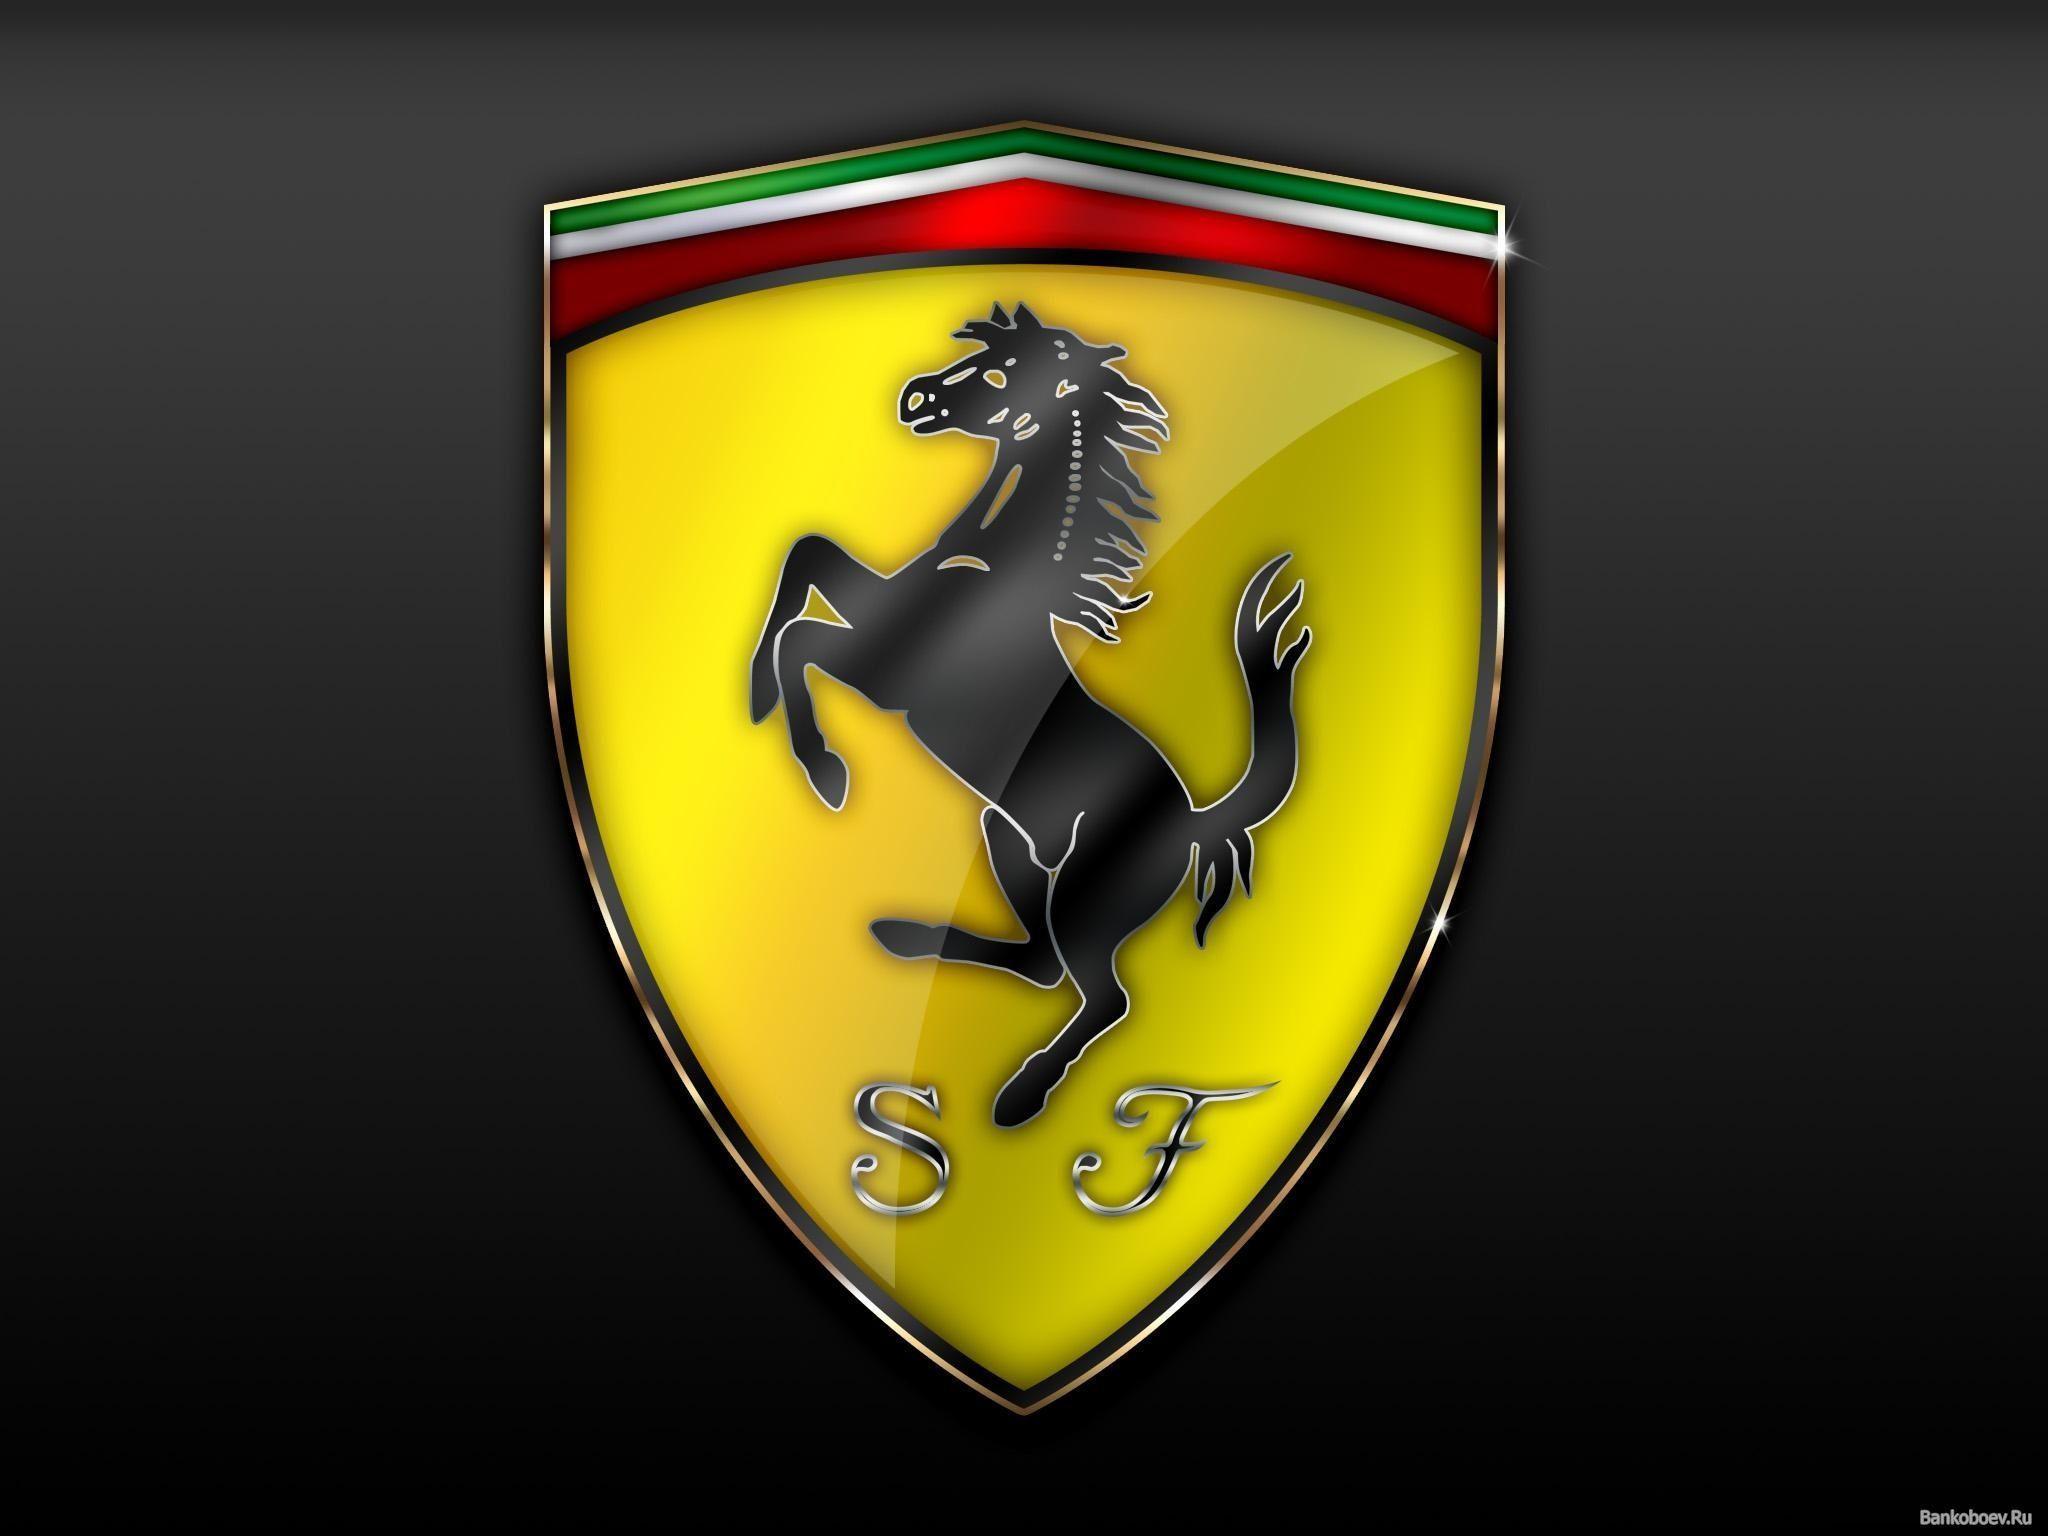 Ferrari Wallpaper for iPhone 11, Pro Max, X, 8, 7, 6 - Free Download on  3Wallpapers